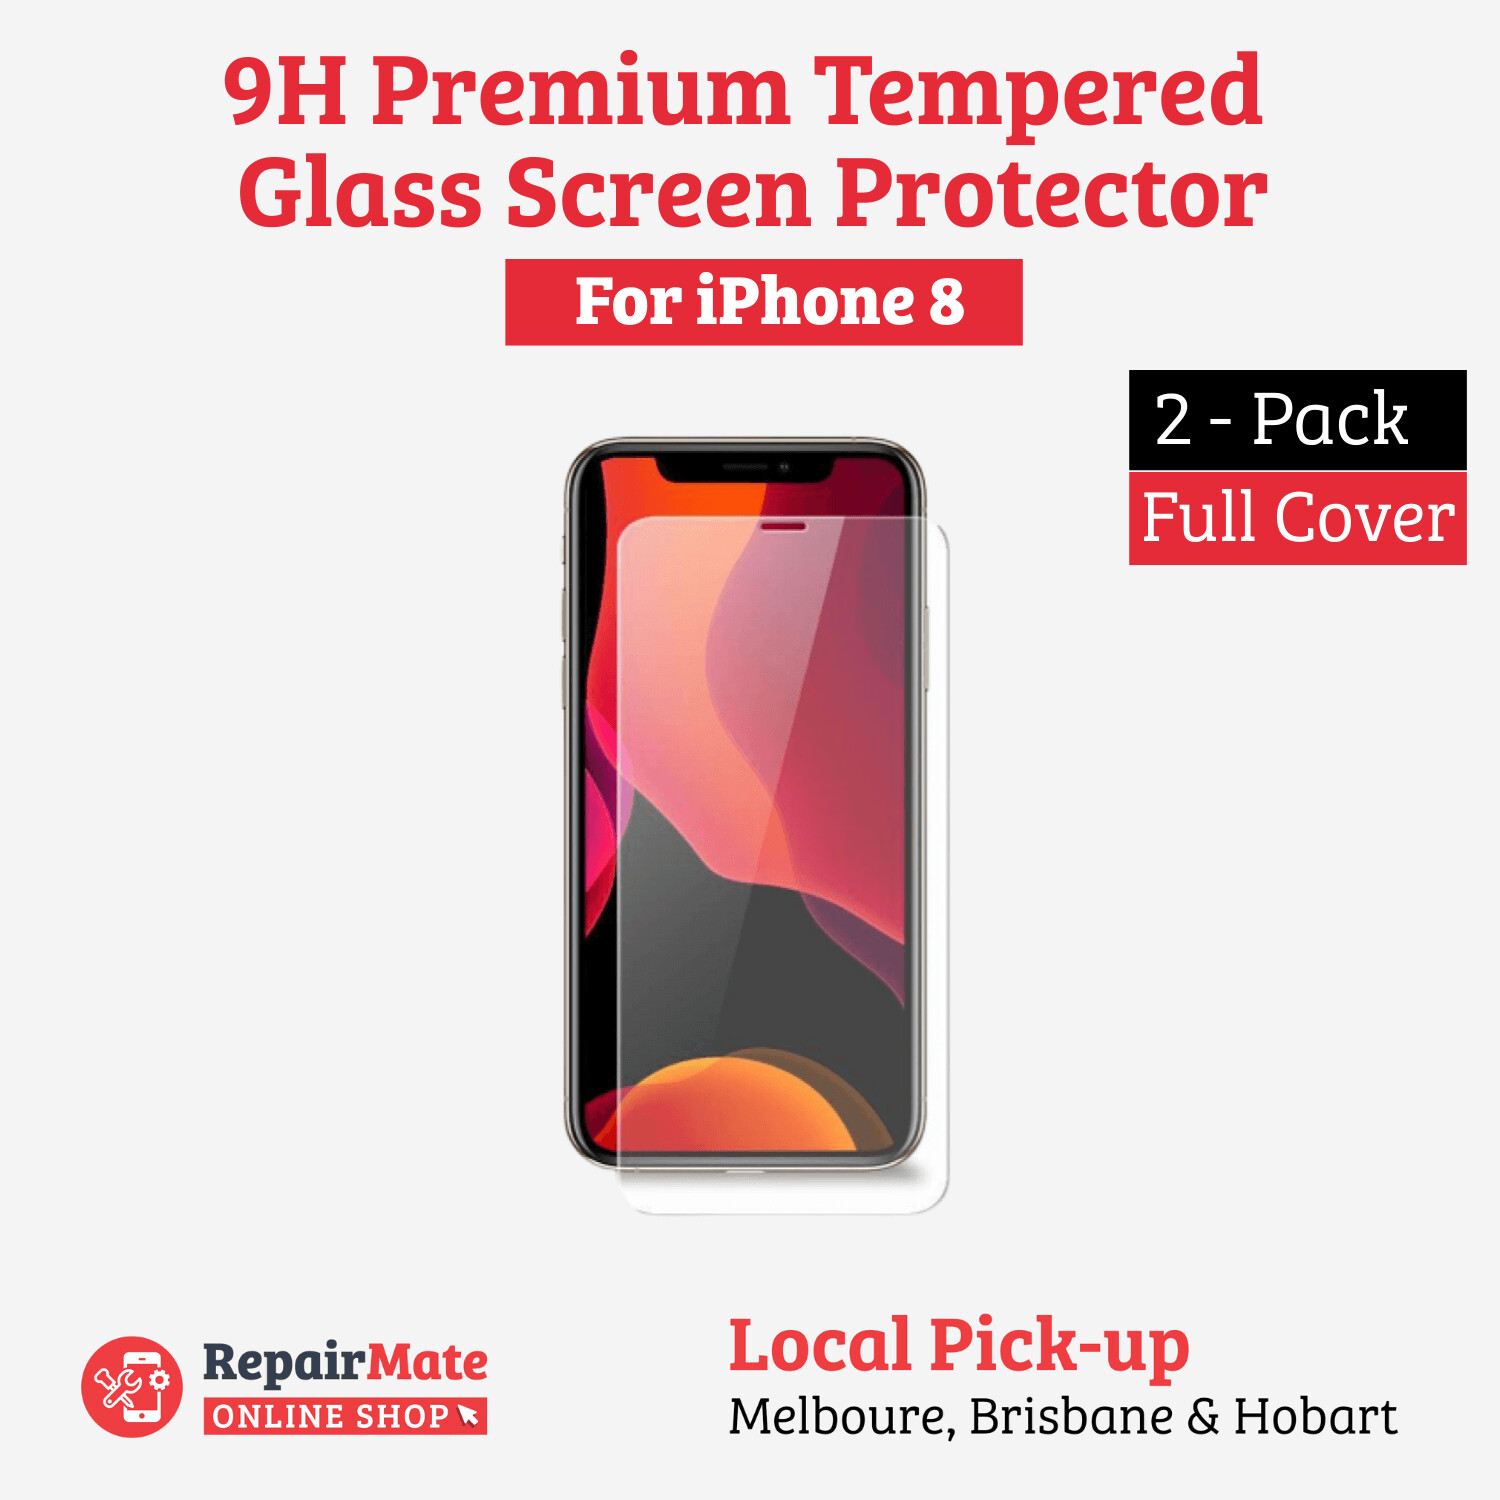 iPhone 8 9H Premium Full Face Tempered Glass Screen Protector [2 Pack]